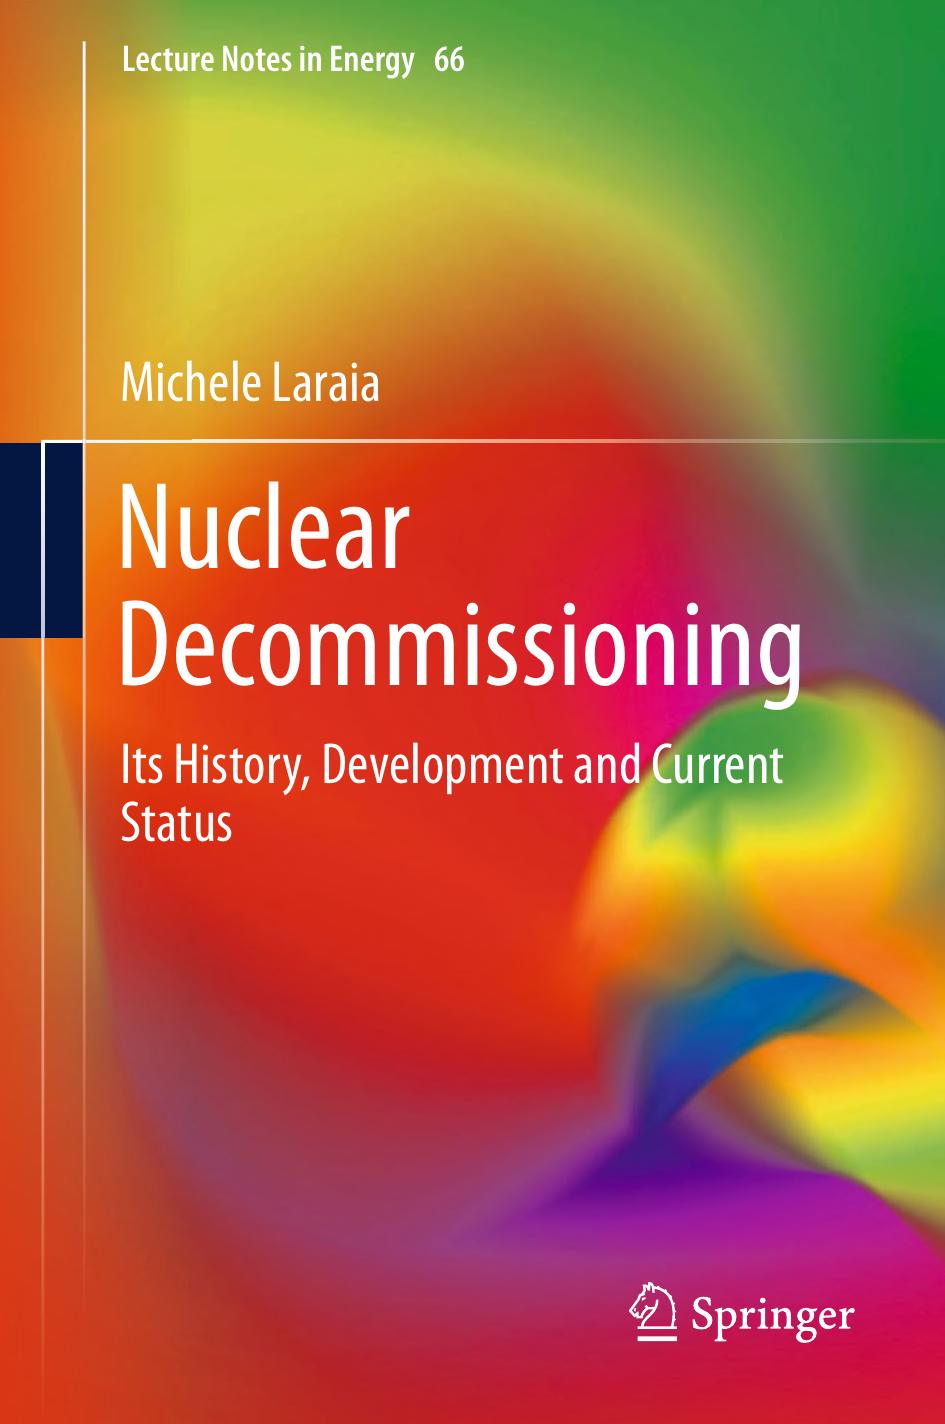 Nuclear Decommissioning by Michele Laraia